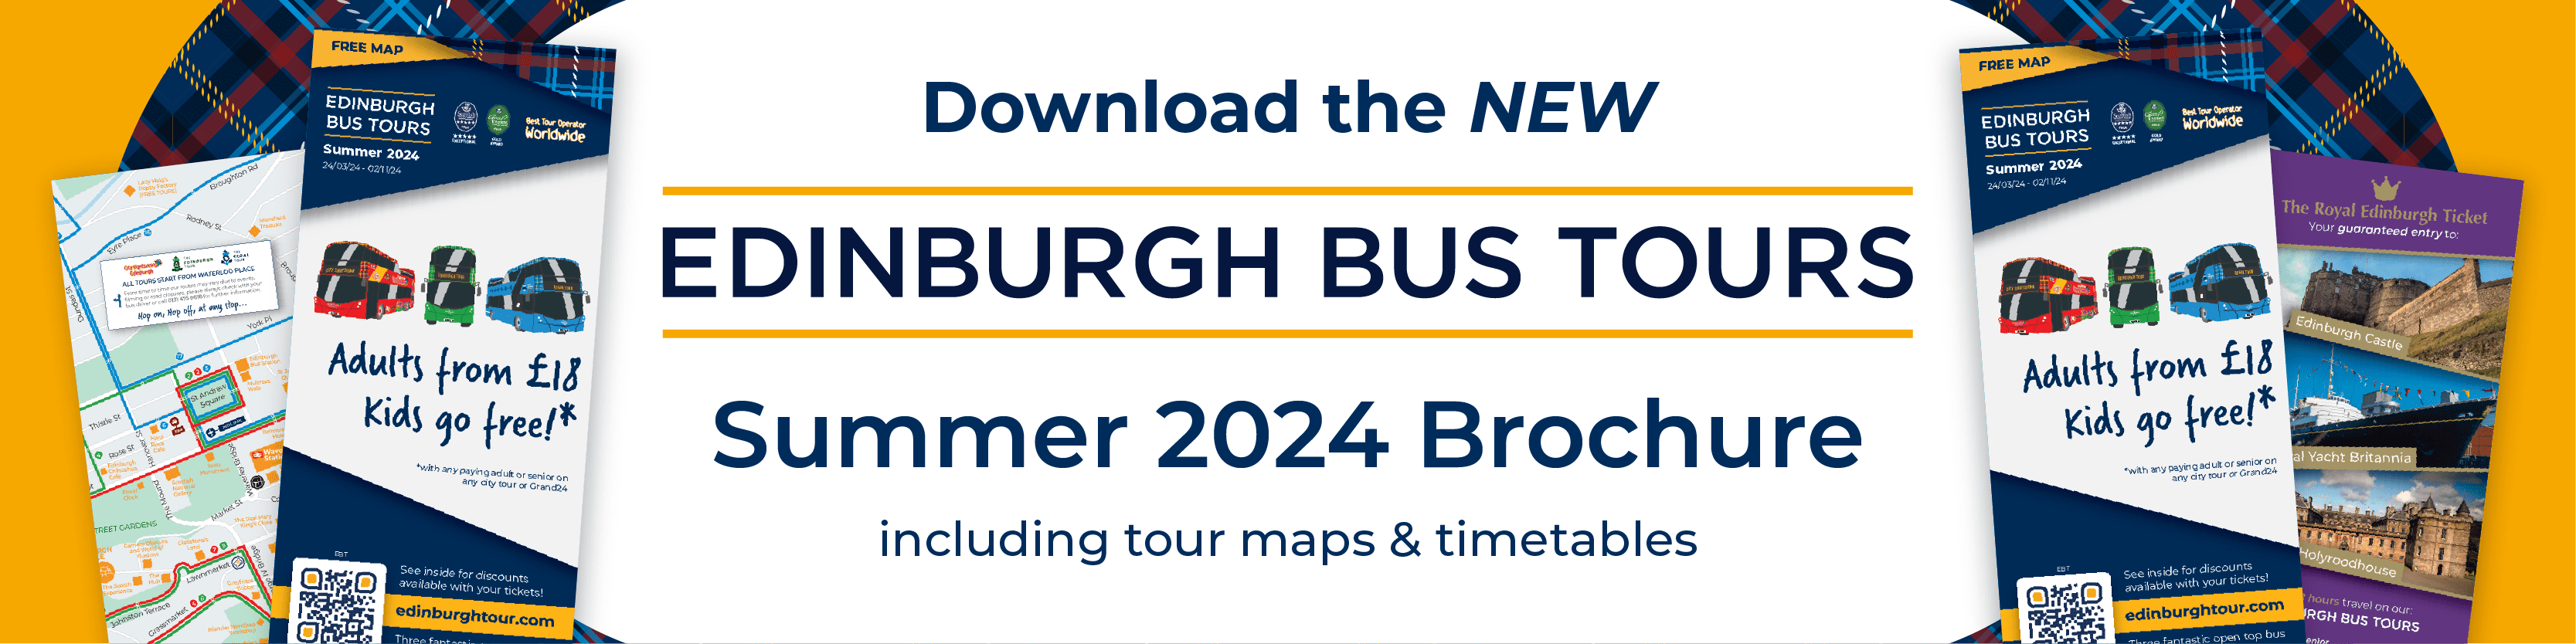 Click to download the New Edinburgh Bus Tours Summer 2024 Brochure including tour maps and timetables.